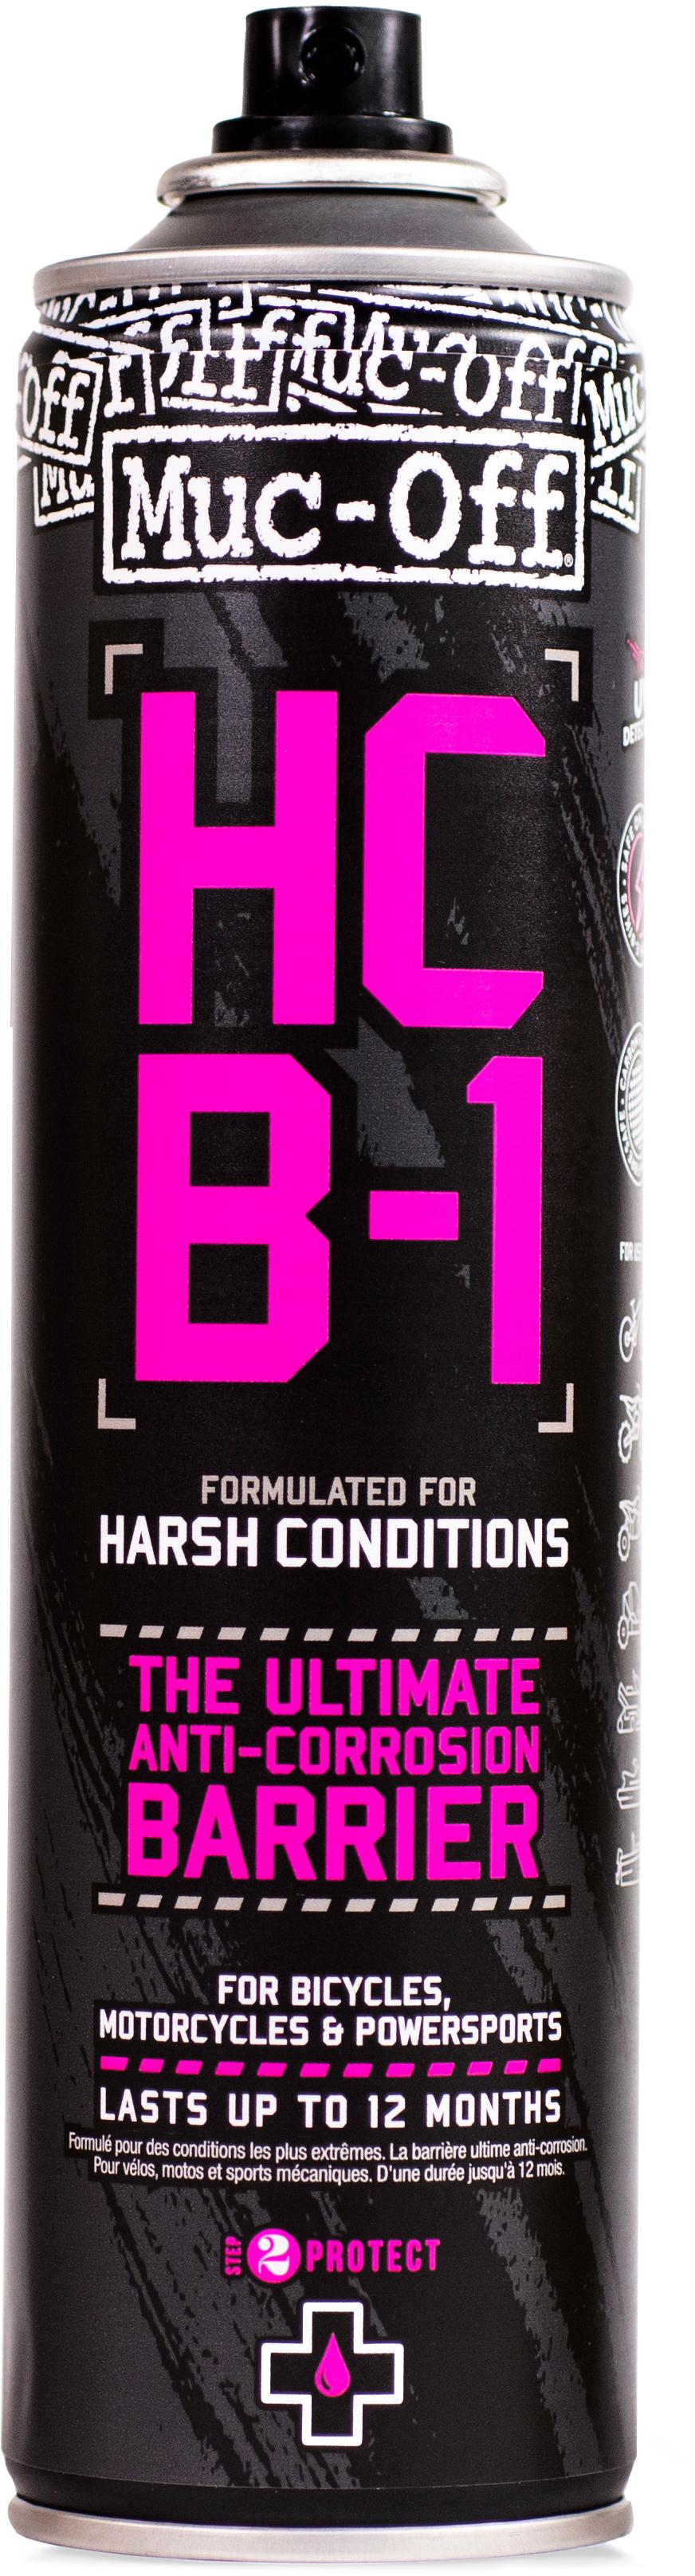 Muc-Off Hcb-1 Harsh Conditions Barrier 400Ml